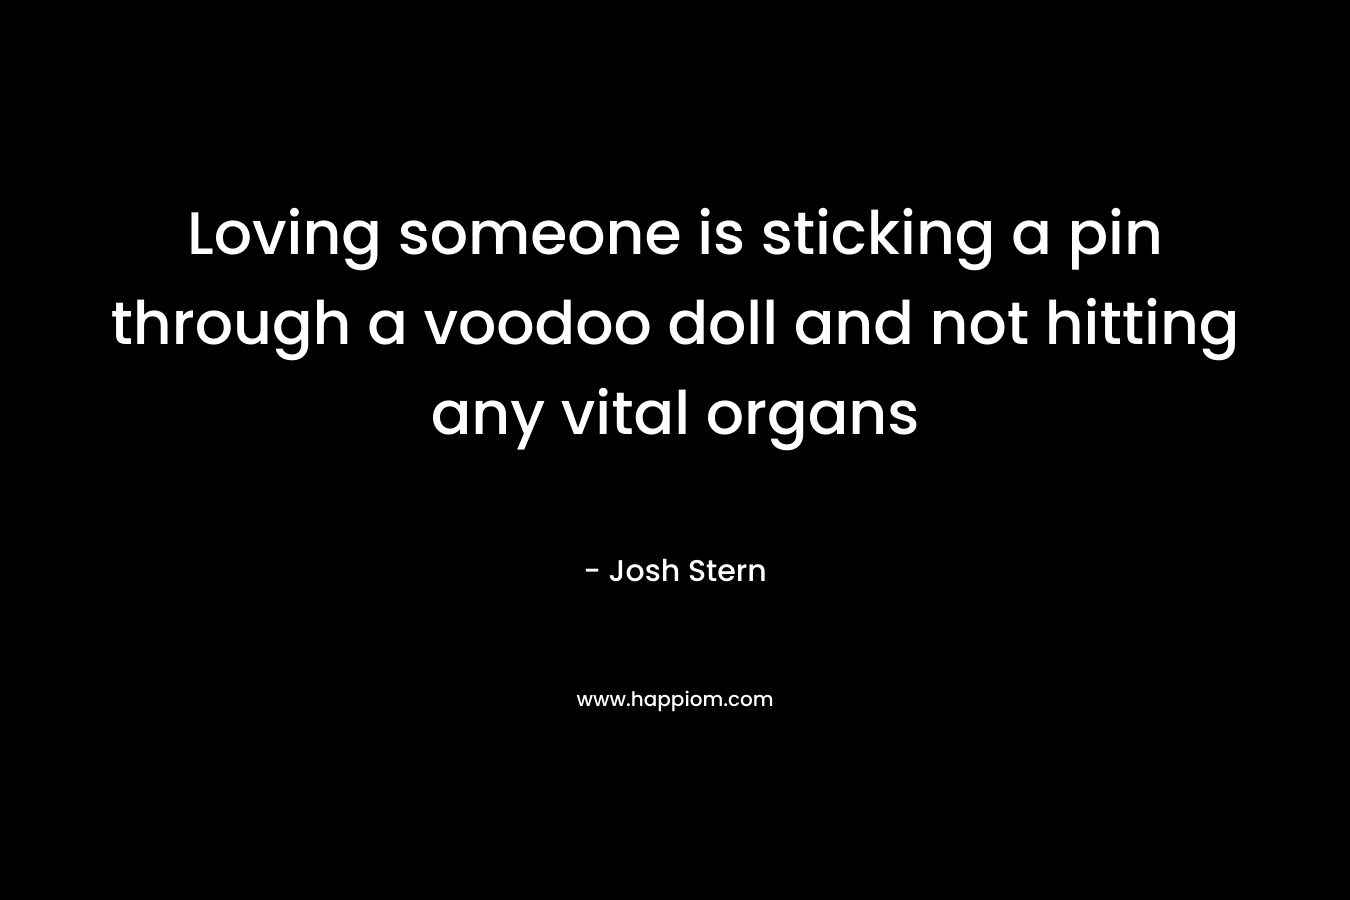 Loving someone is sticking a pin through a voodoo doll and not hitting any vital organs